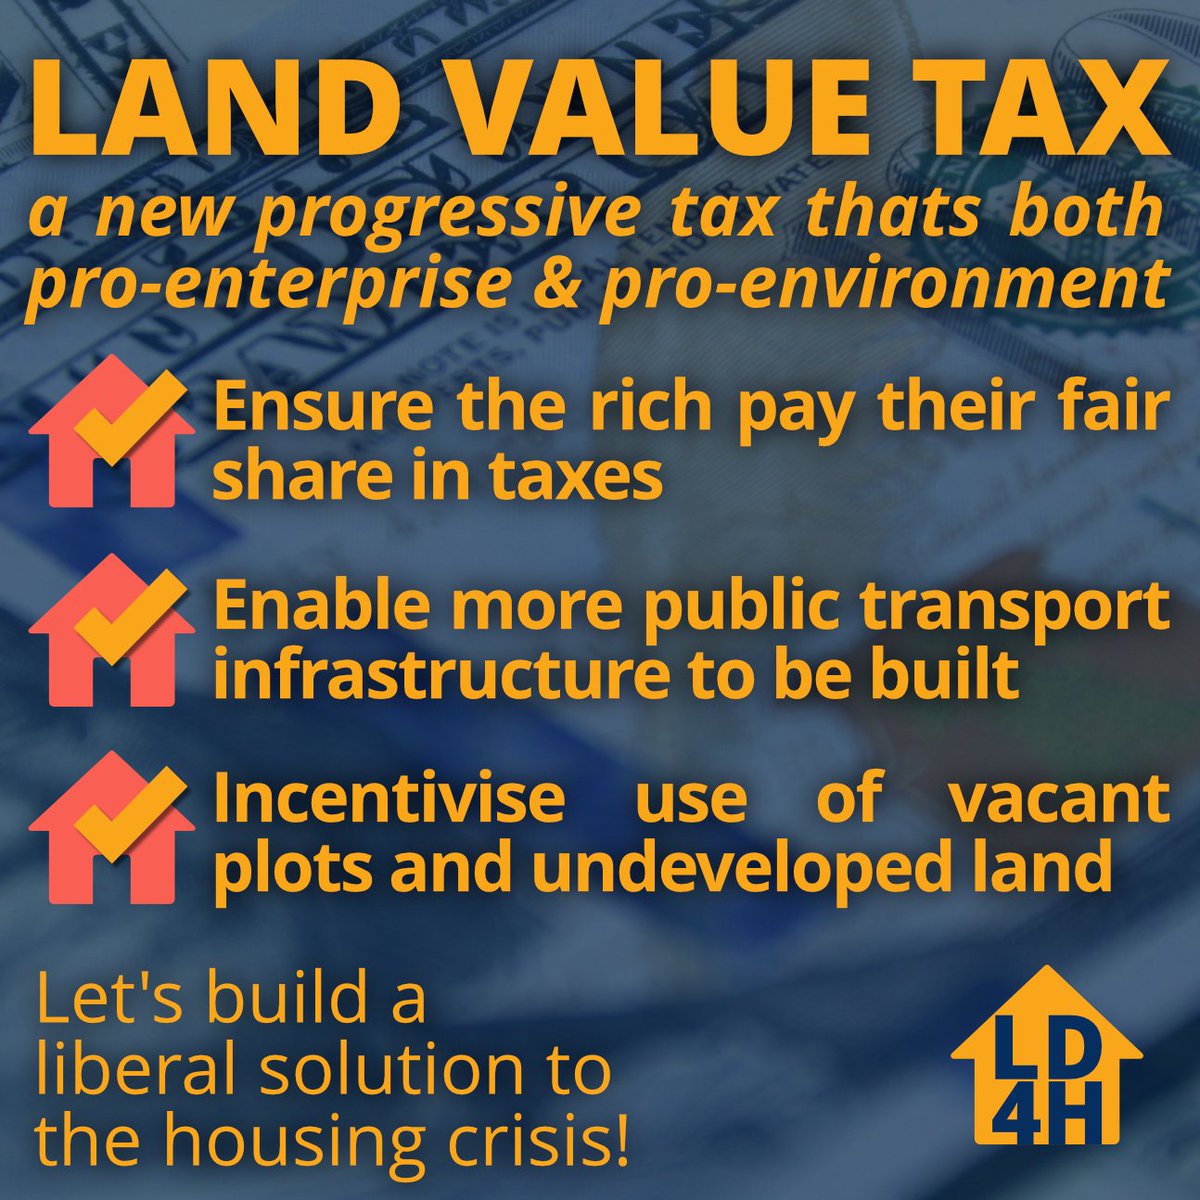 A land value tax is the progressive policy that we need to radically shake up the housing market. Find out more 👉 libhousing.com/better-propert…